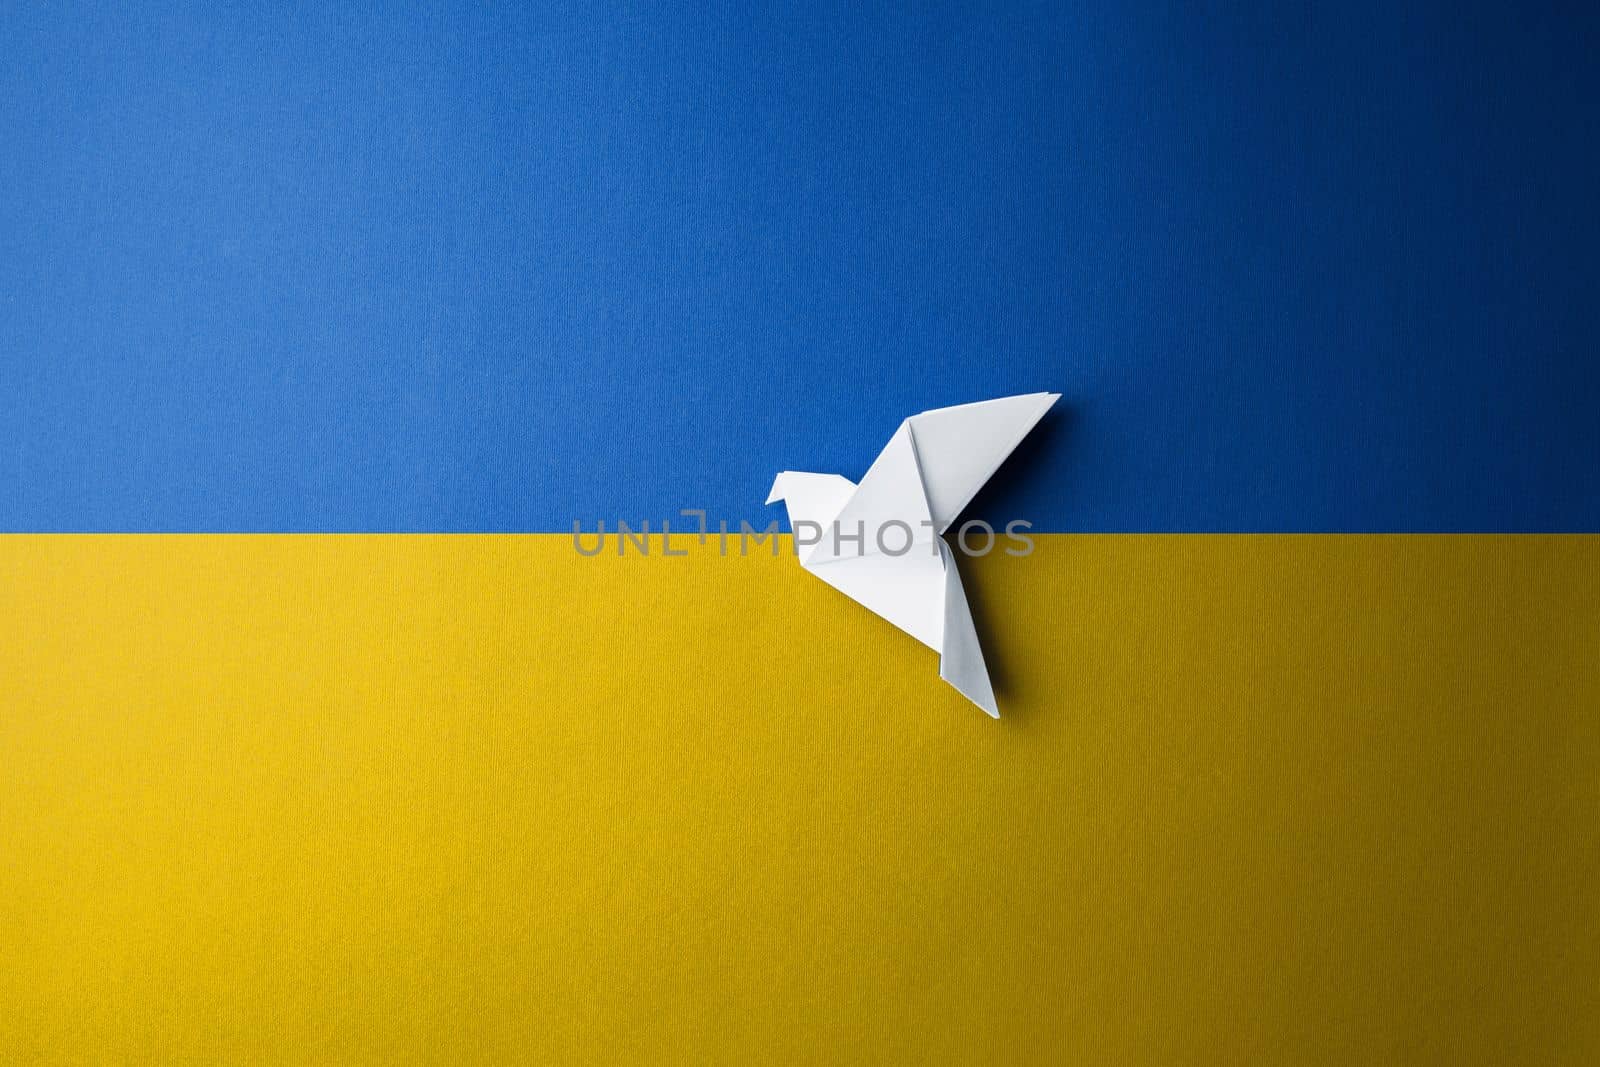 white paper dove bird on background of flag of ukraine with blue yellow color. symbol of freedom. concept needs help and support, truth will win